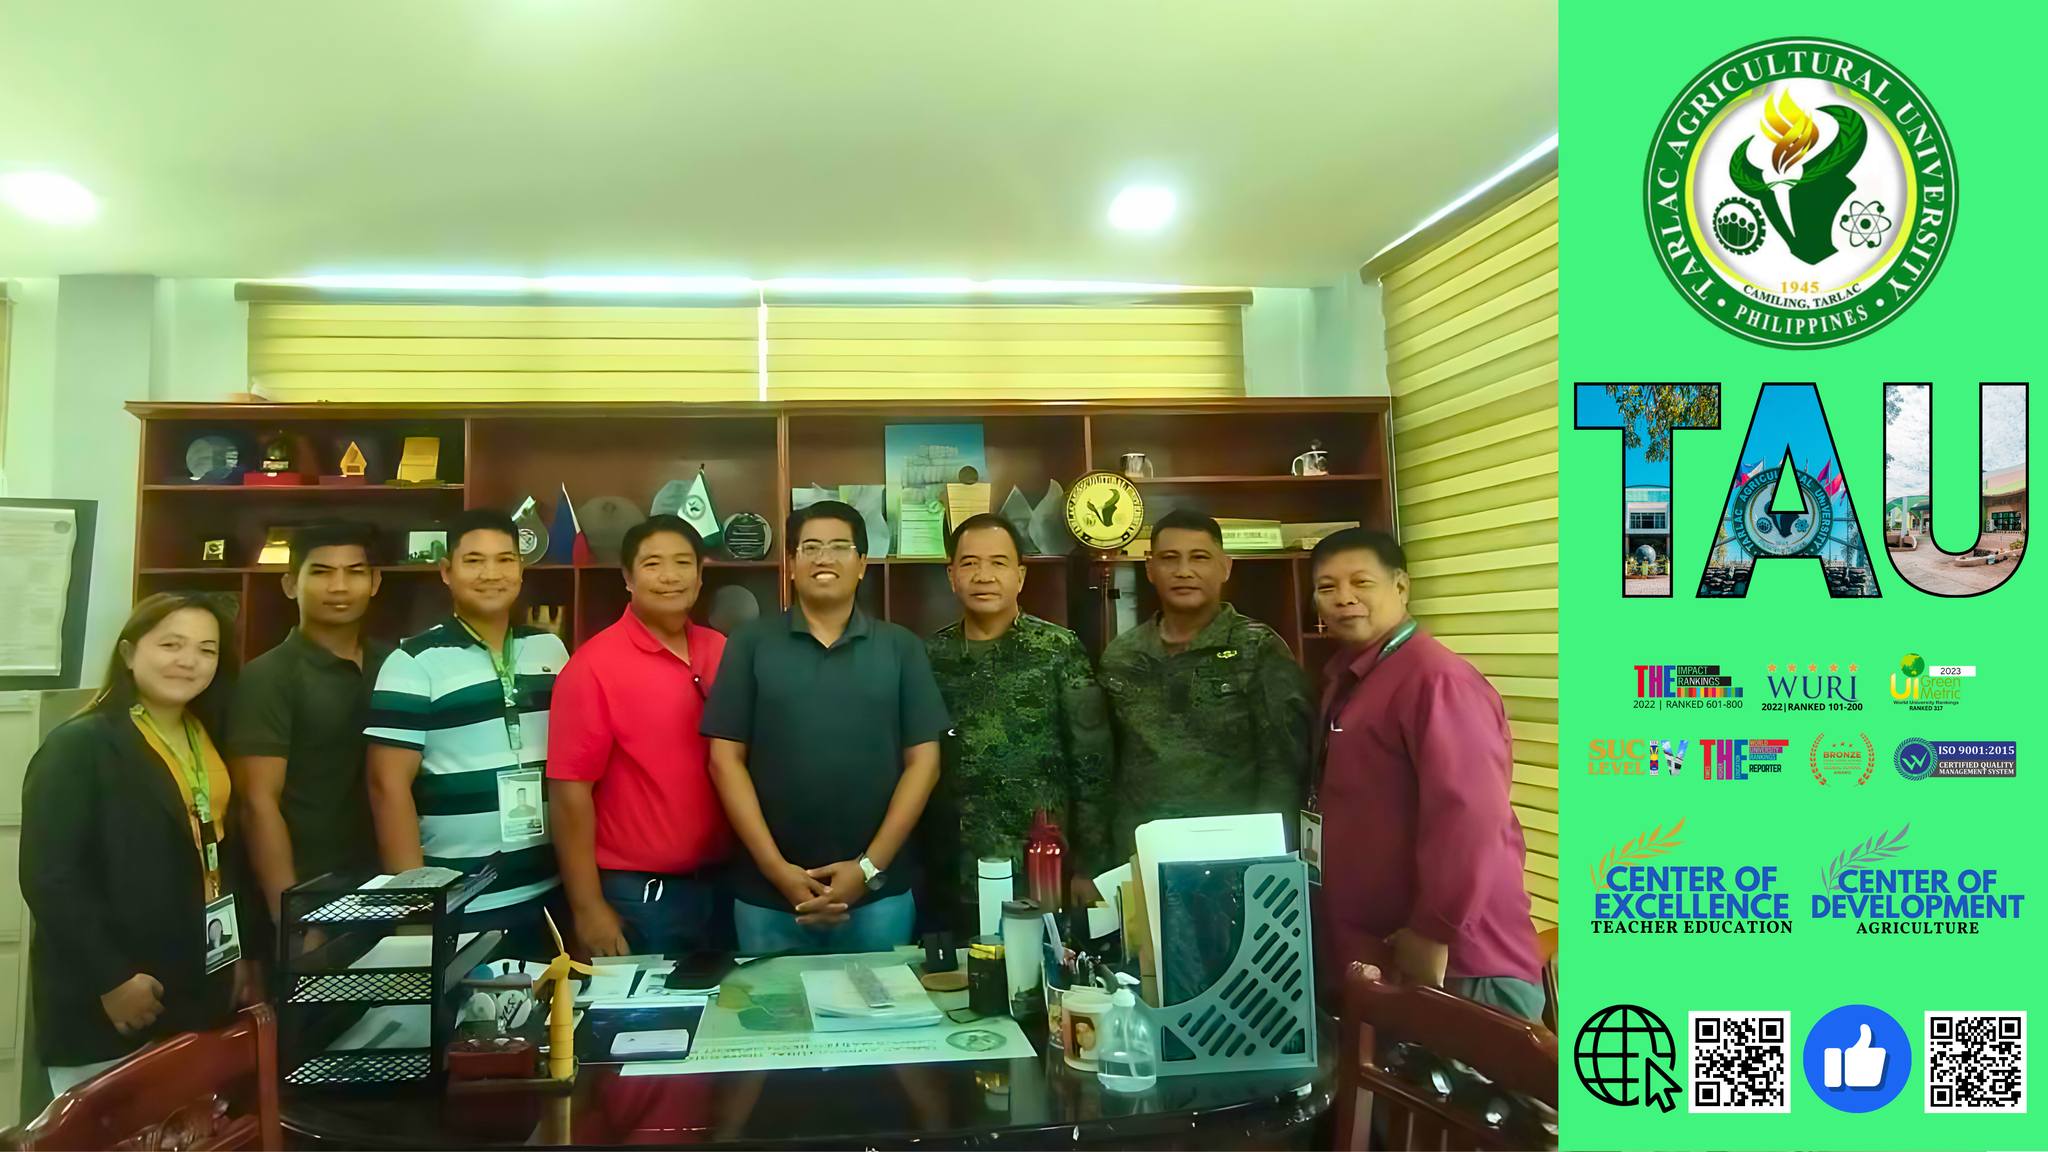 𝐂𝐀𝐏𝐓𝐔𝐑𝐄𝐃 𝐈𝐍 𝐋𝐄𝐍𝐒 | Before the week ends, representatives from three partners of Tarlac Agricultural University (TAU) meet with Dr. Silverio Ramon DC. Salunson, TAU President, on 28 June, to renew their commitment to strengthening their cooperation with the University.